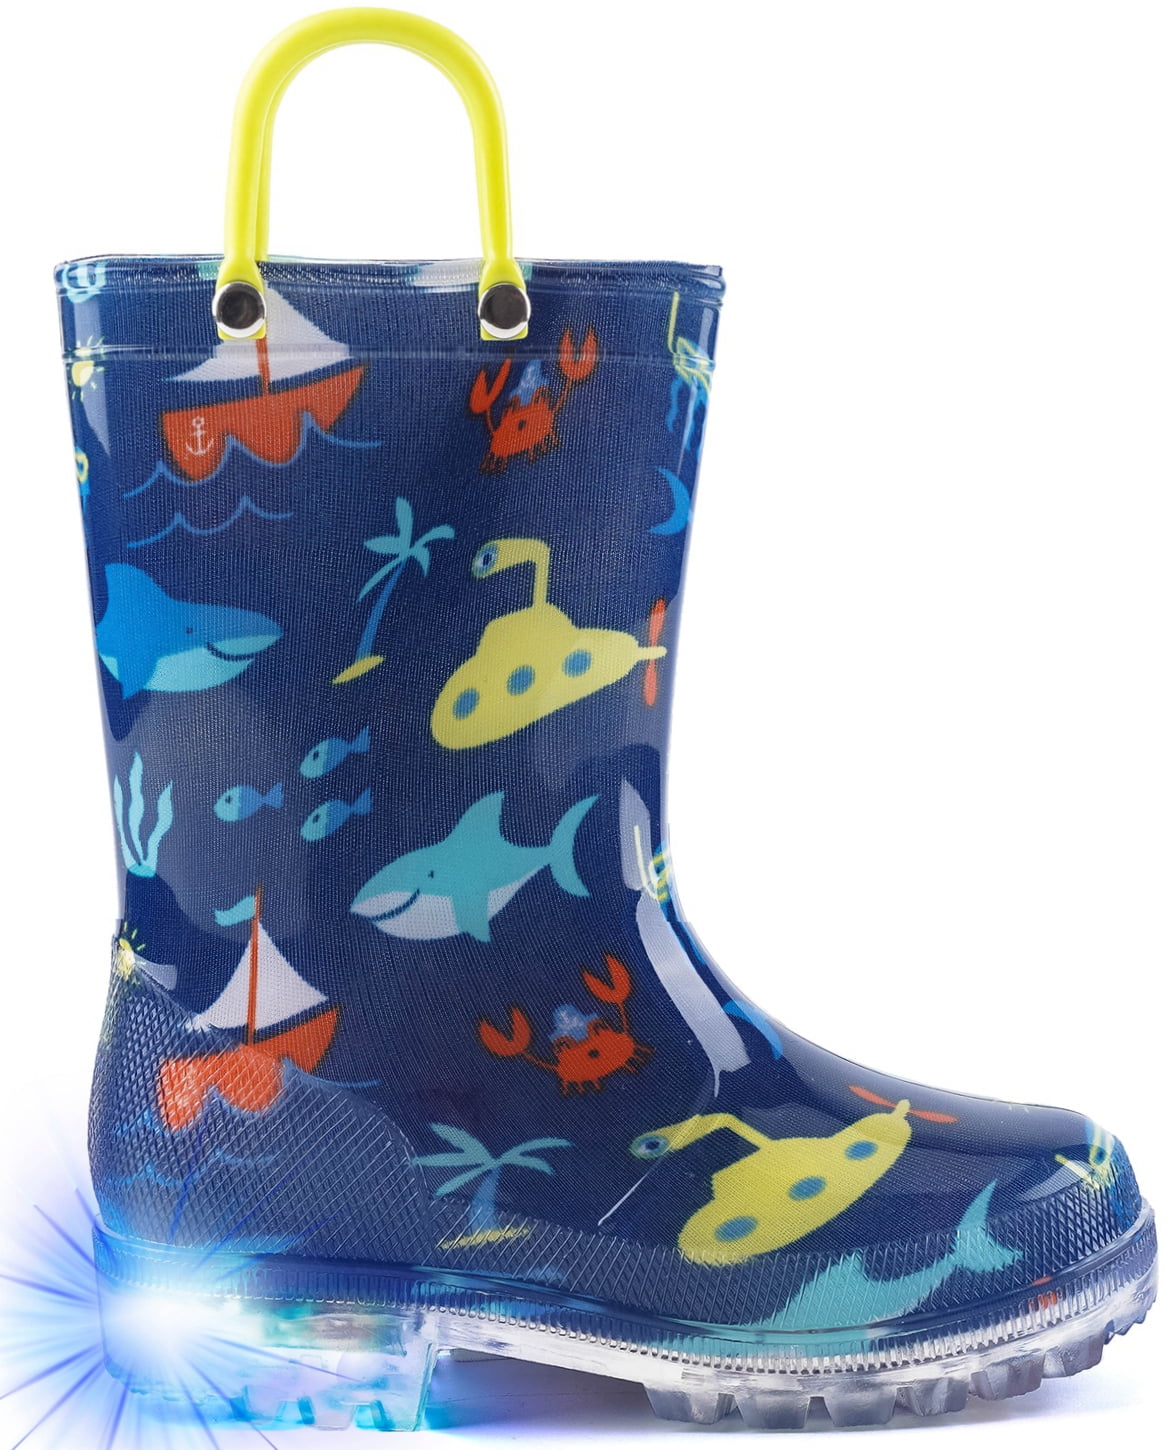 Outee Toddler Kids Printed Light Up Rain Boots Mud Boots 